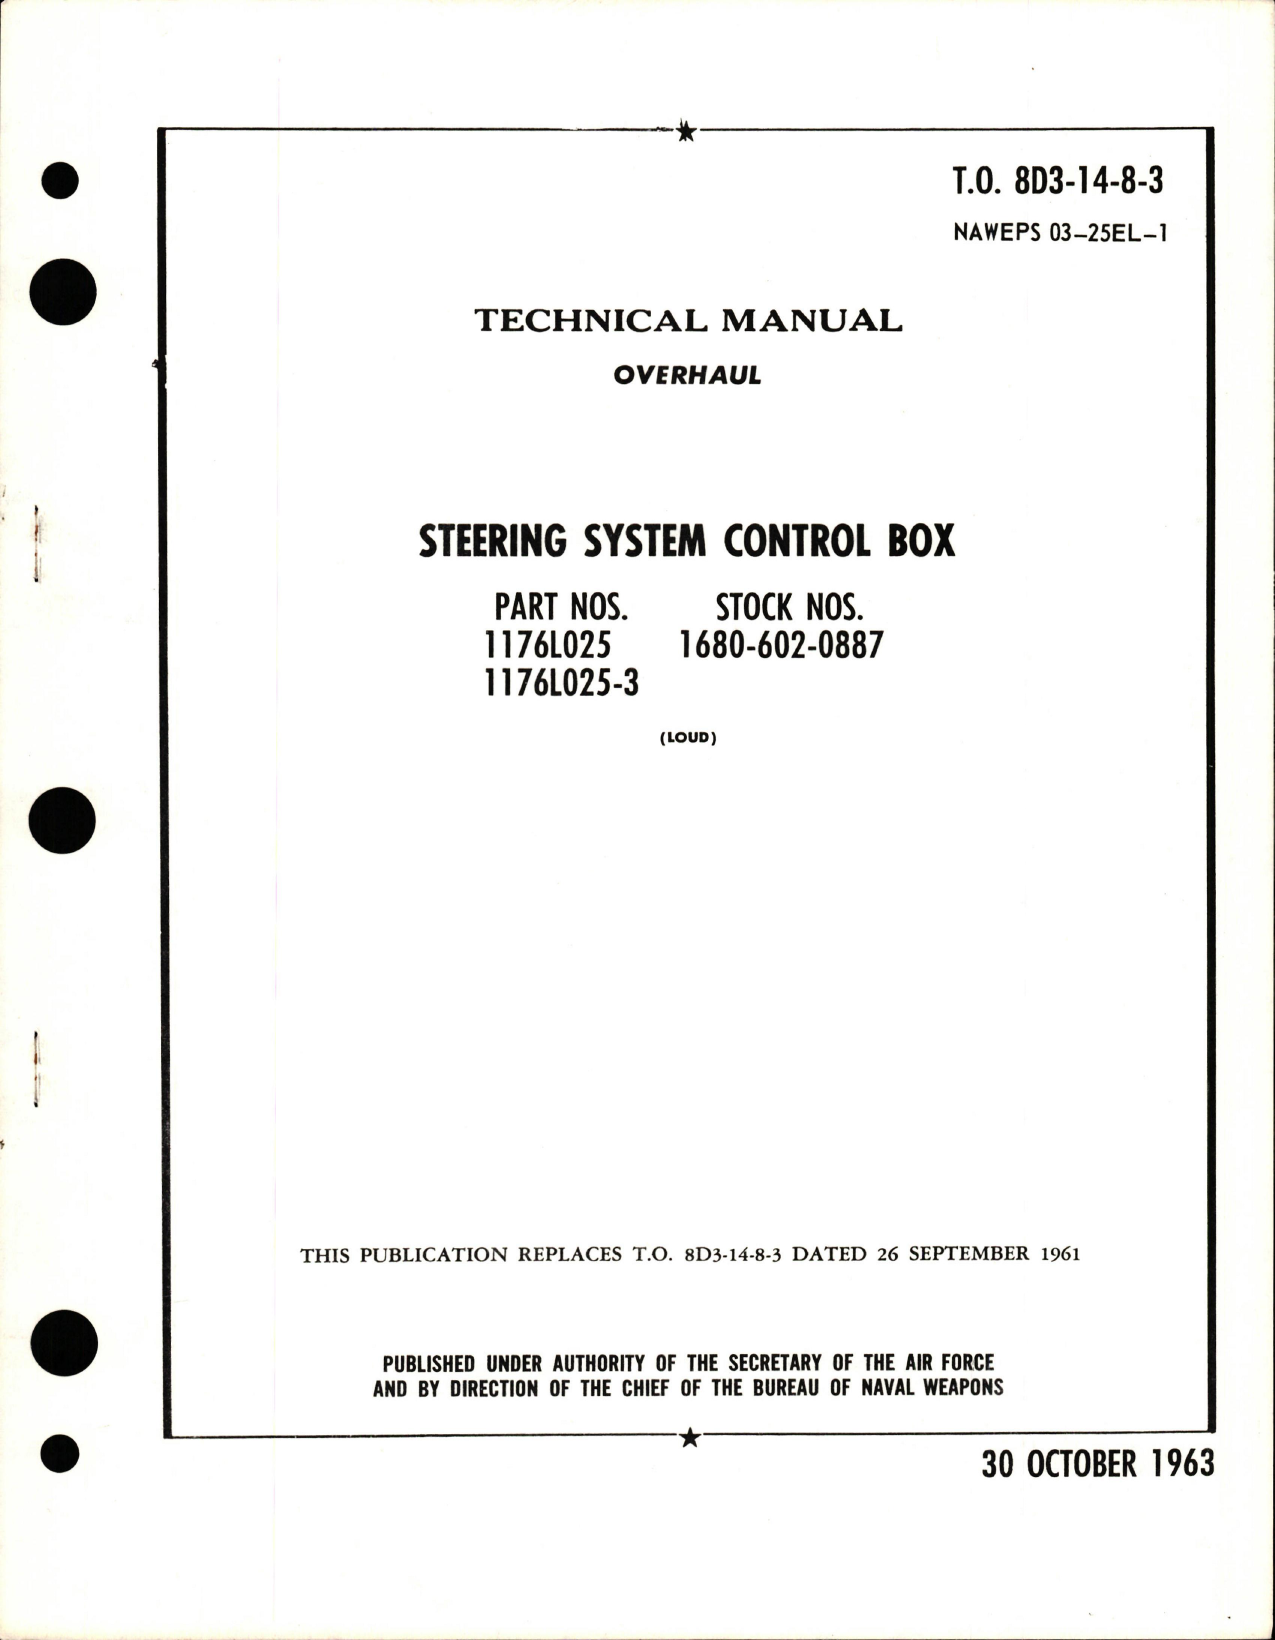 Sample page 1 from AirCorps Library document: Overhaul for Steering System Control Box - Parts 1176L025 and 1176L025-3 